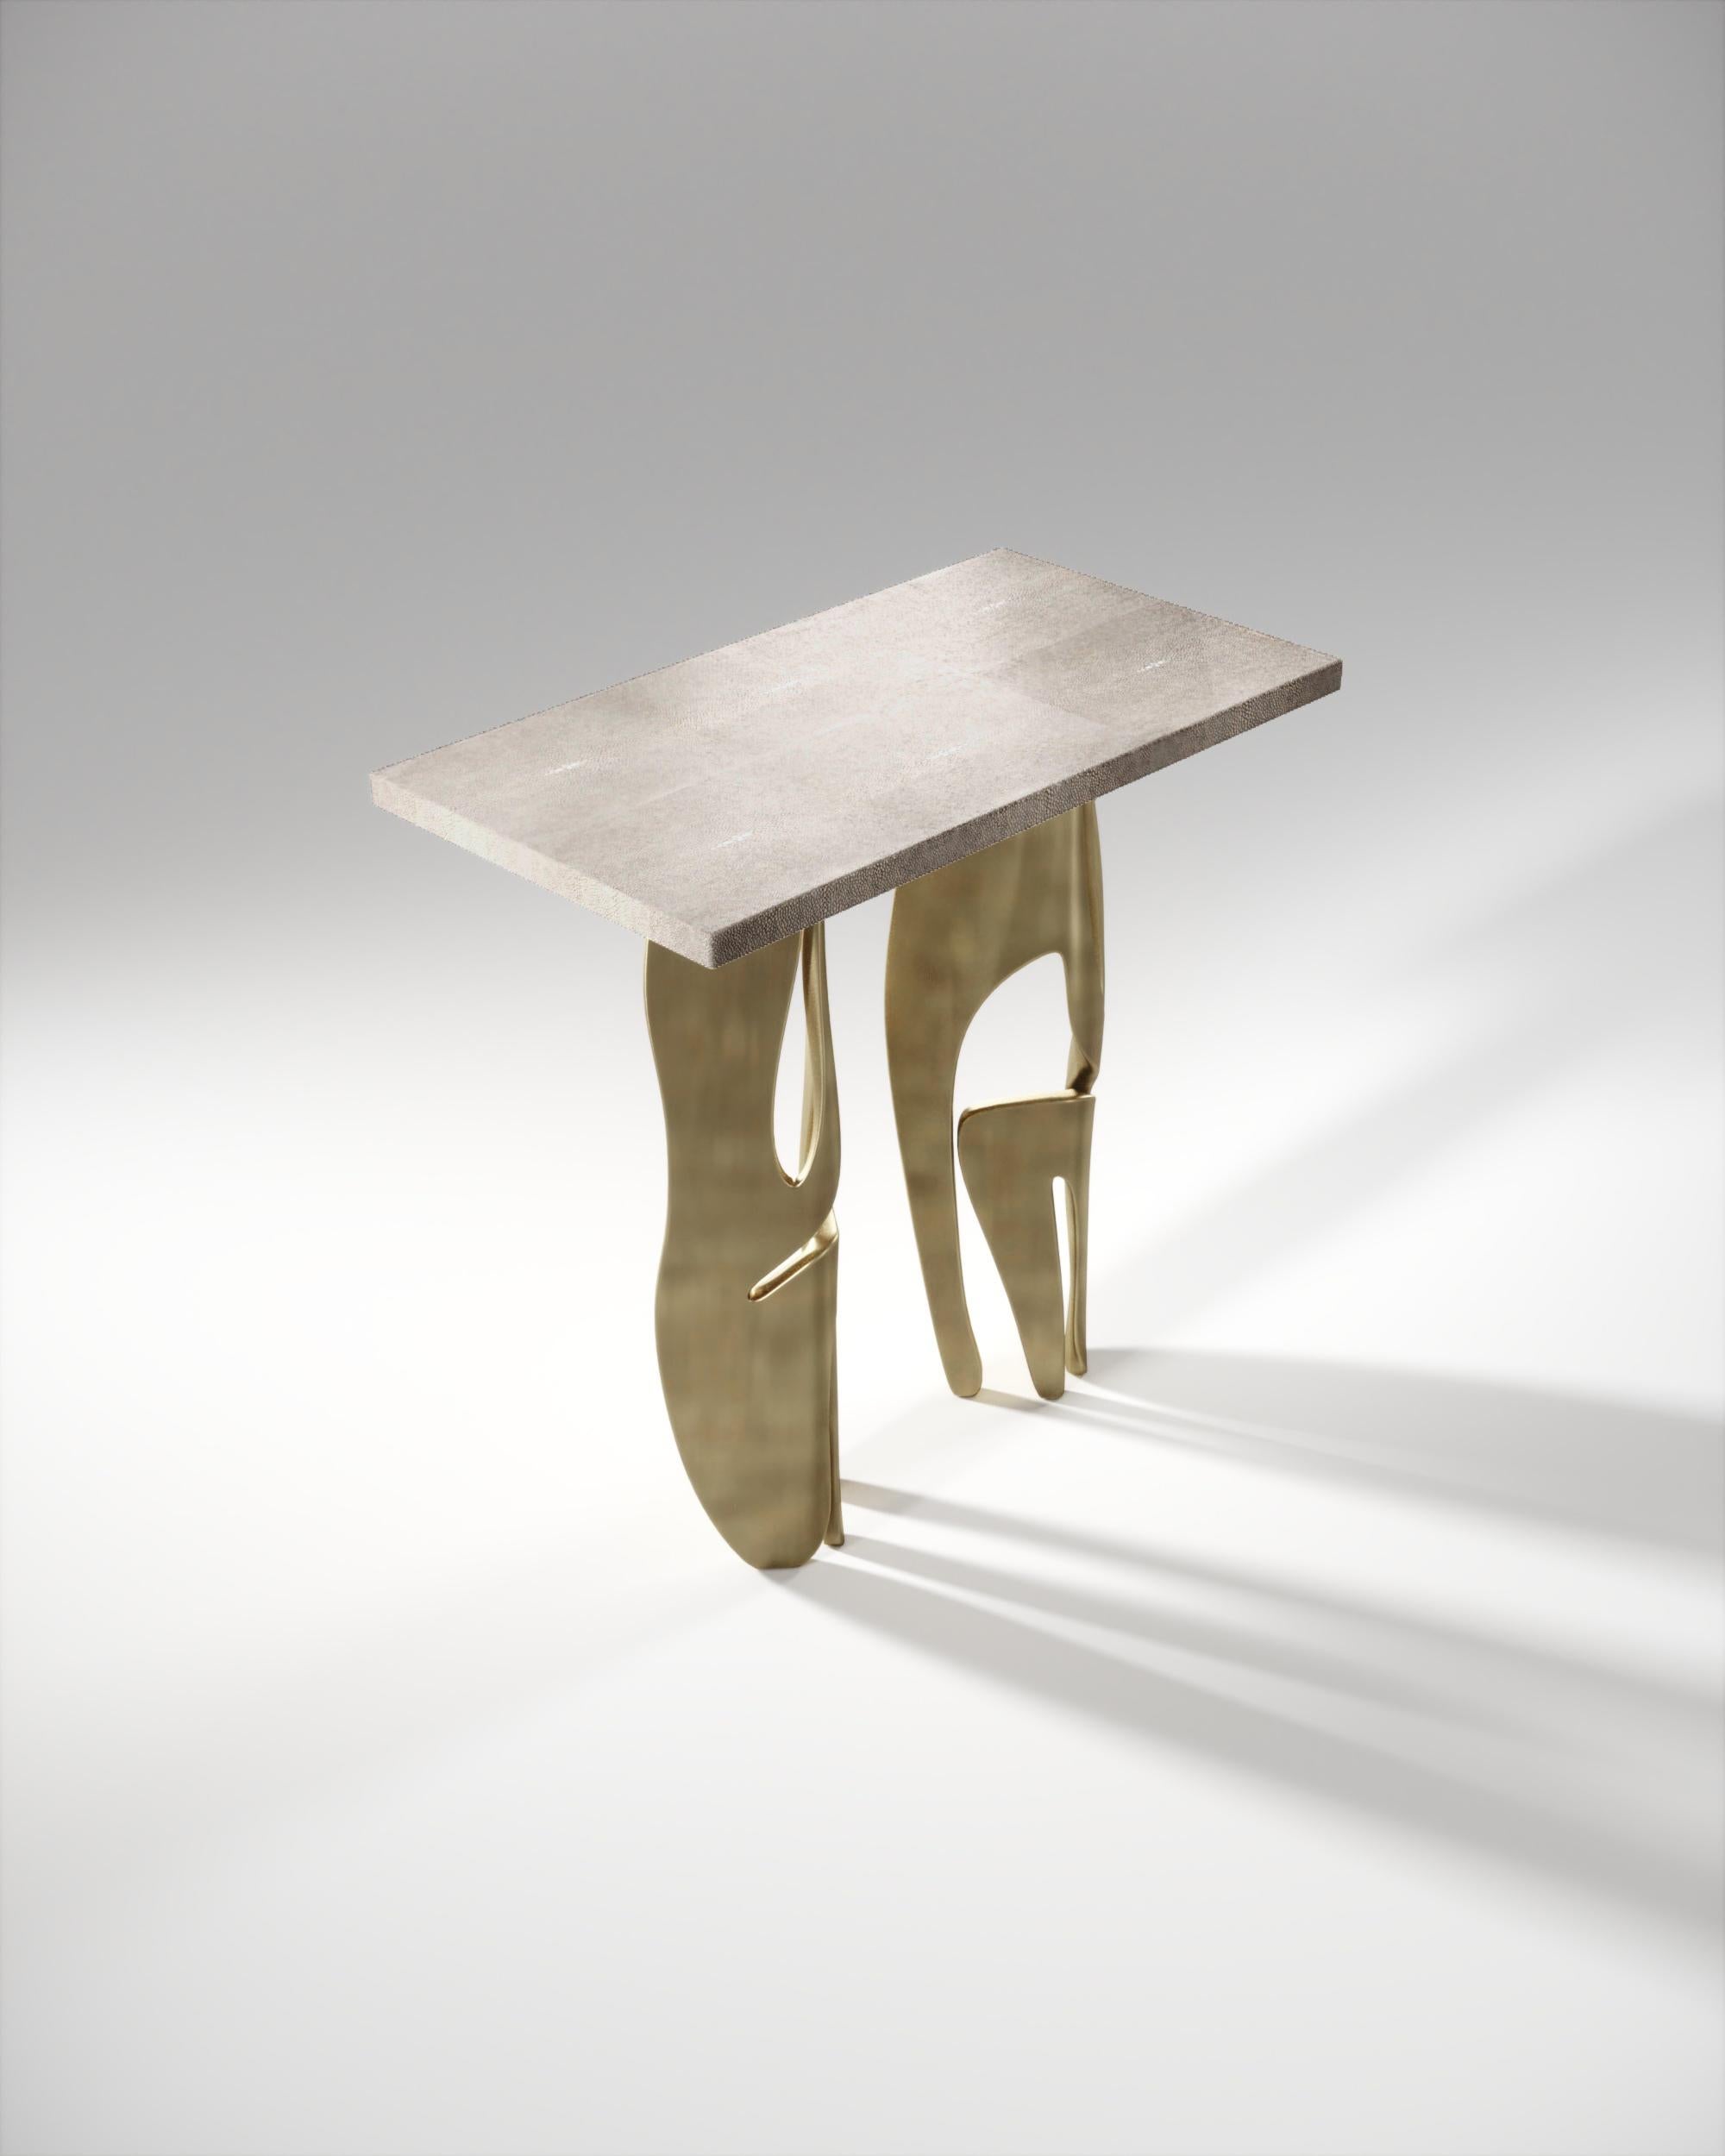 The metropolis rectangle side table by R&Y Augousti is both dramatic and organic it’s unique design. The cream shagreen inlaid top sits on a pair of ethereal and sculptural bronze-patina brass legs. This piece makes for the perfect end table and is